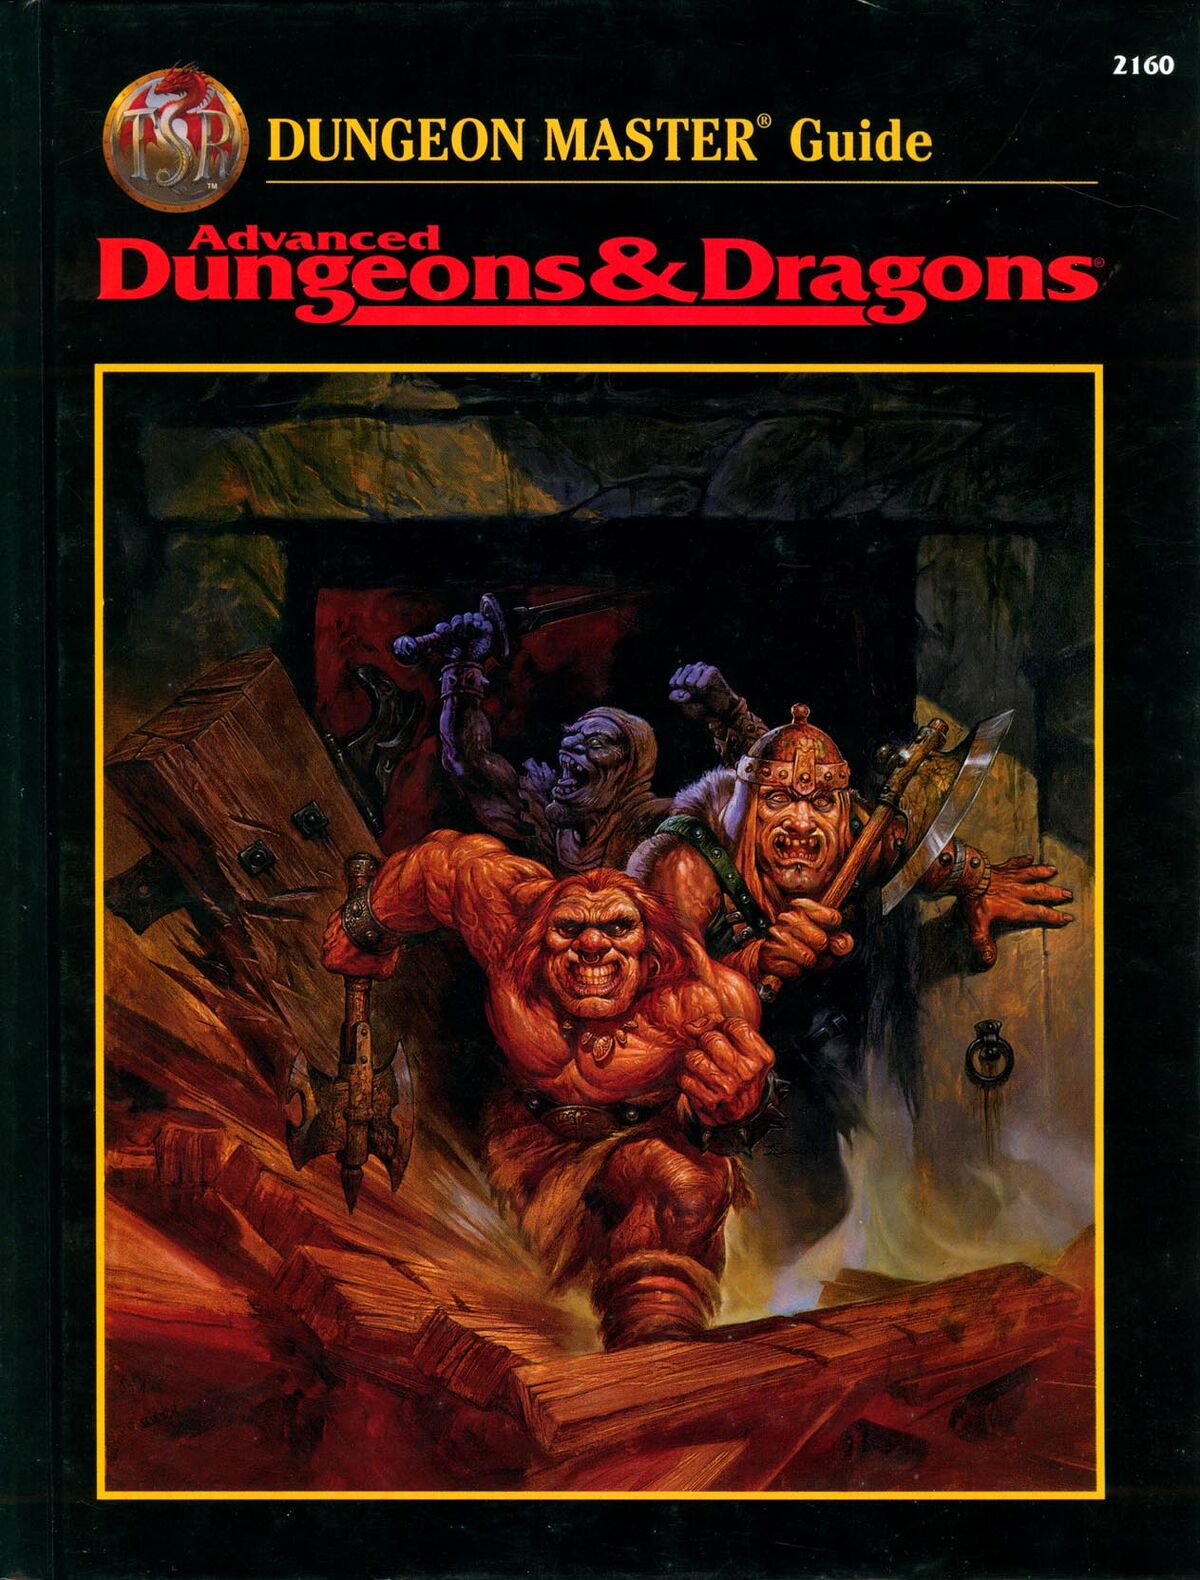 Dungeons and Dragons 1 издание. Dungeons and Dragons Dungeon Master. Advanced Dungeons and Dragons 2e 1995. Dungeons and Dragons 2 издание.